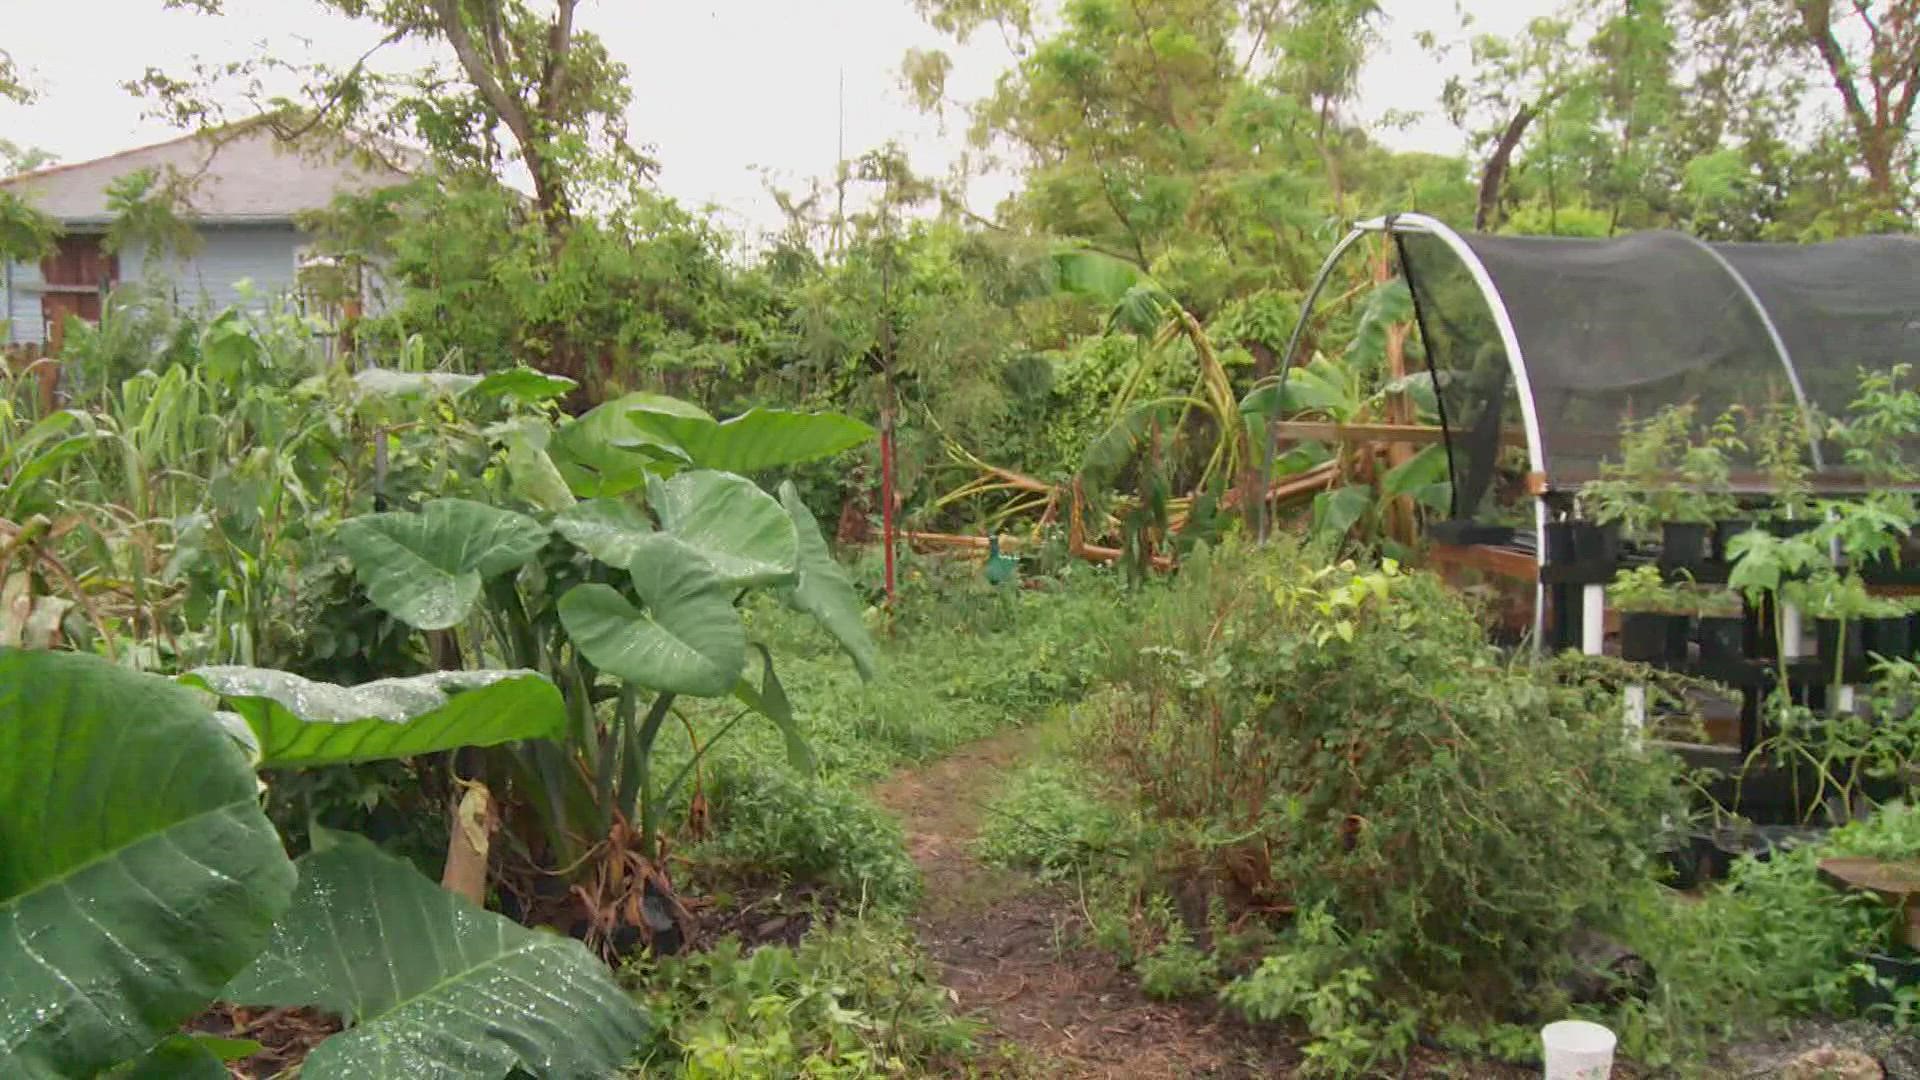 After Hurricane Ida, farmers are struggling to make up for the loss of crops and vegetation.